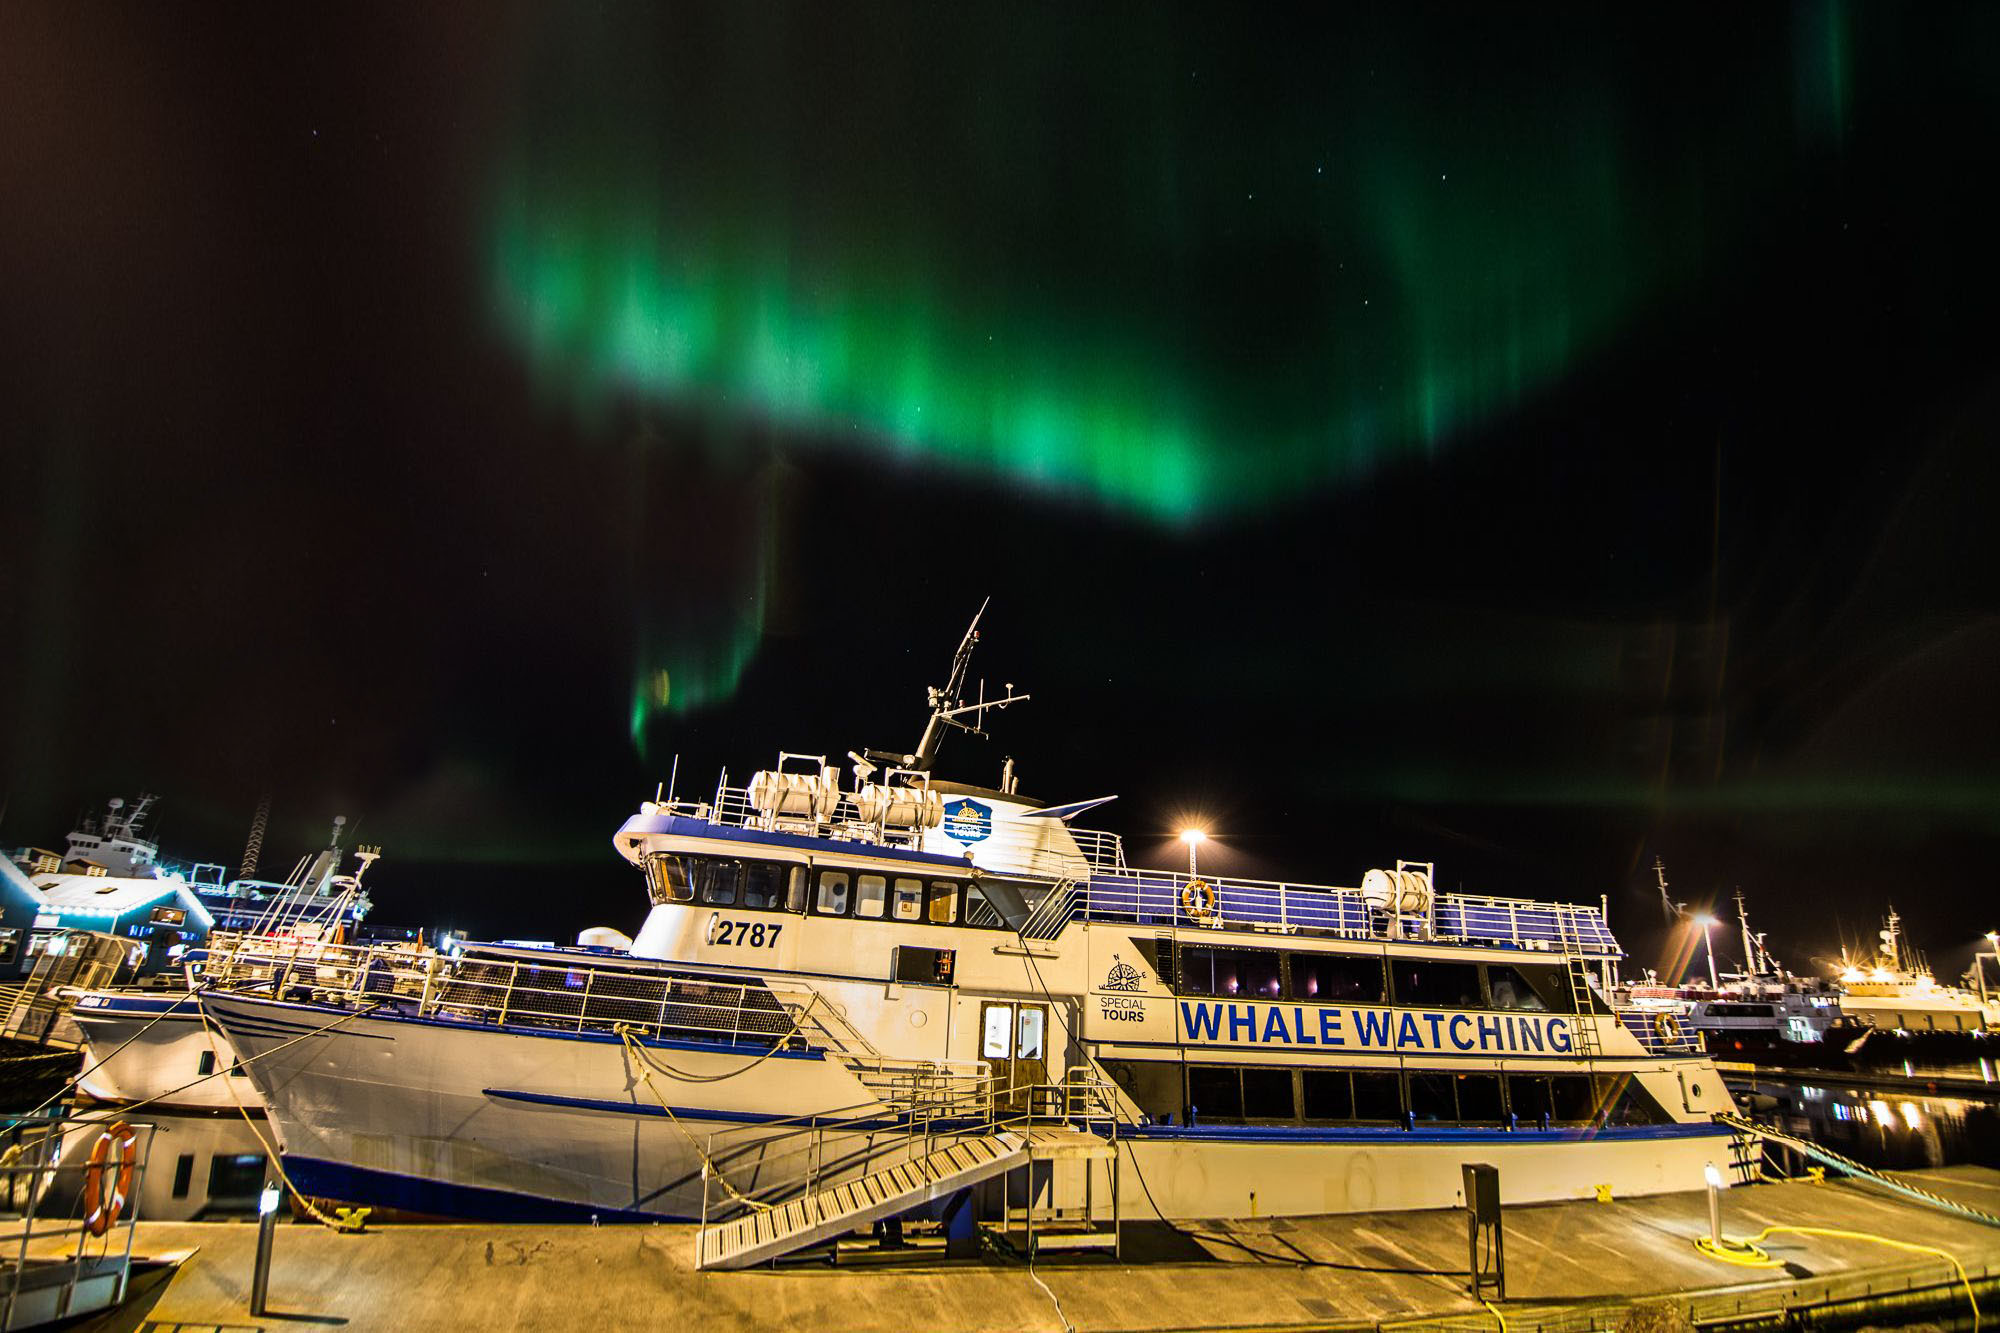 Special Tours Northern Lights Cruise Ship Andrea in the harbour of Reykjavik with dancing Northern Lights